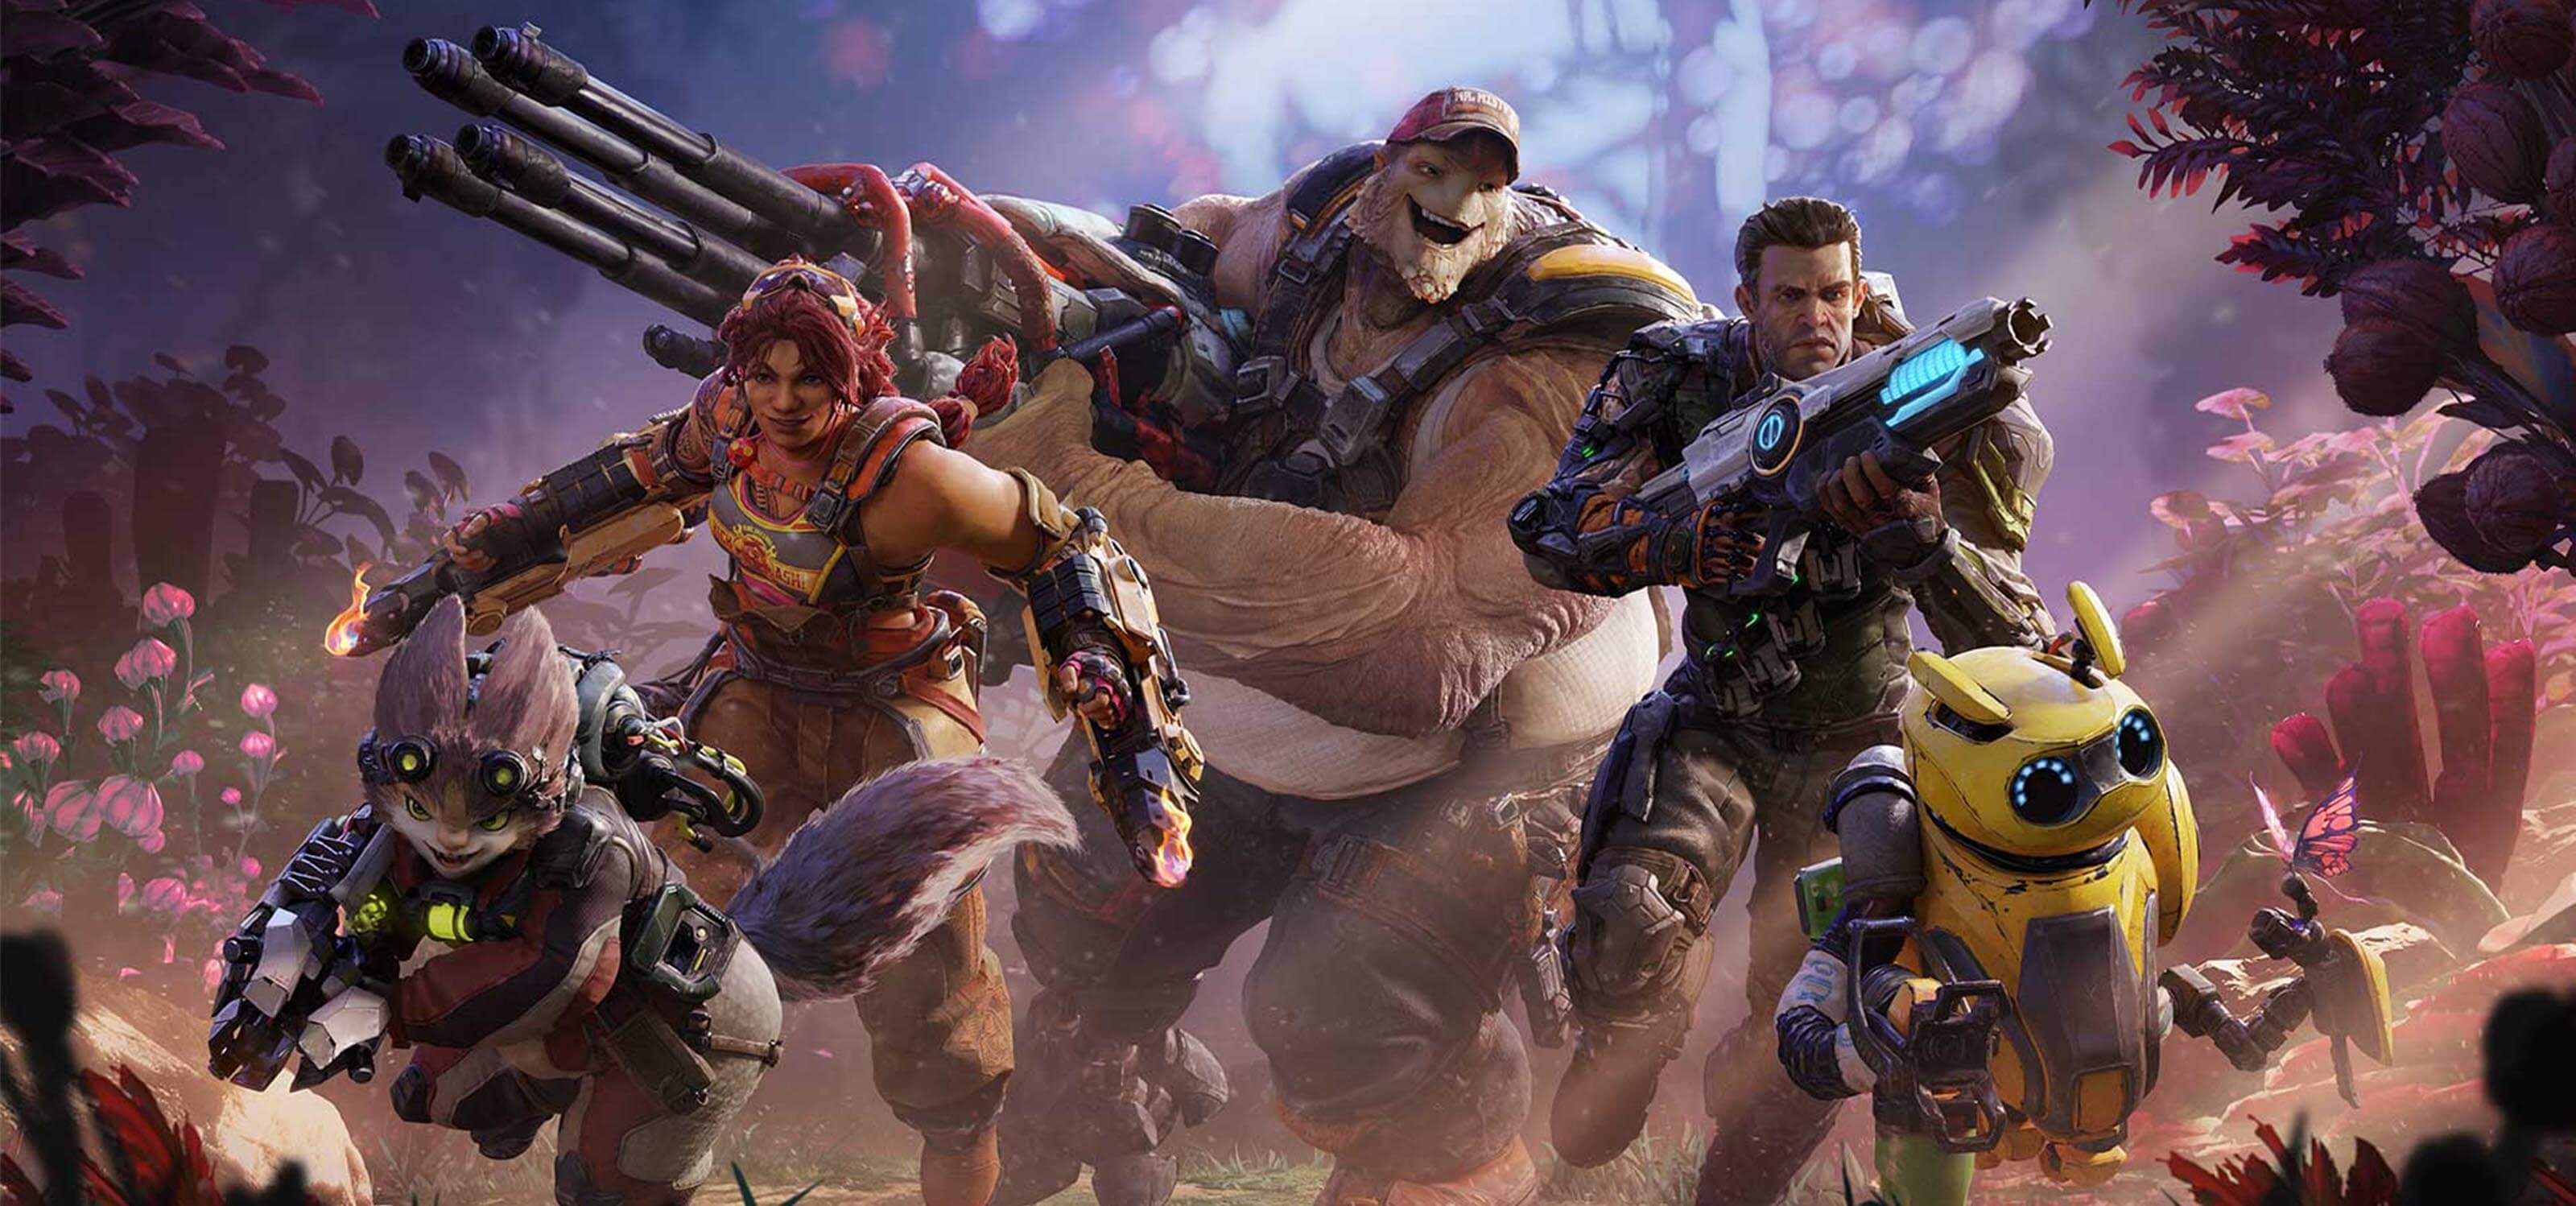 A group of several heroes from the Crucible game charging into action.